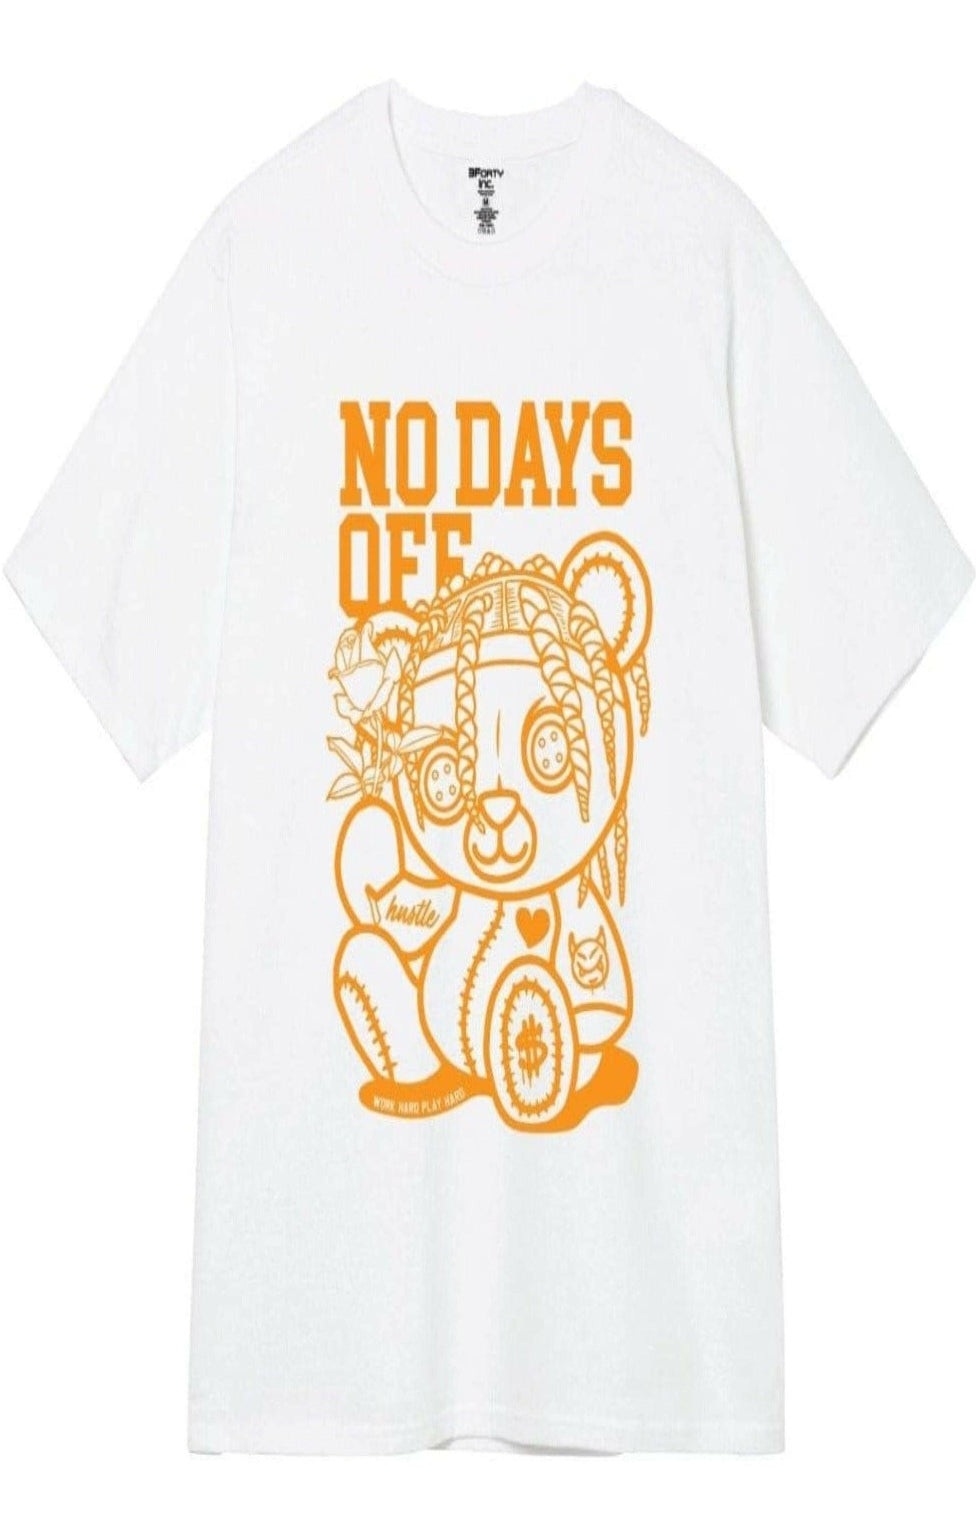 Epicplacess tops Printed No Days Off Graphic Tee